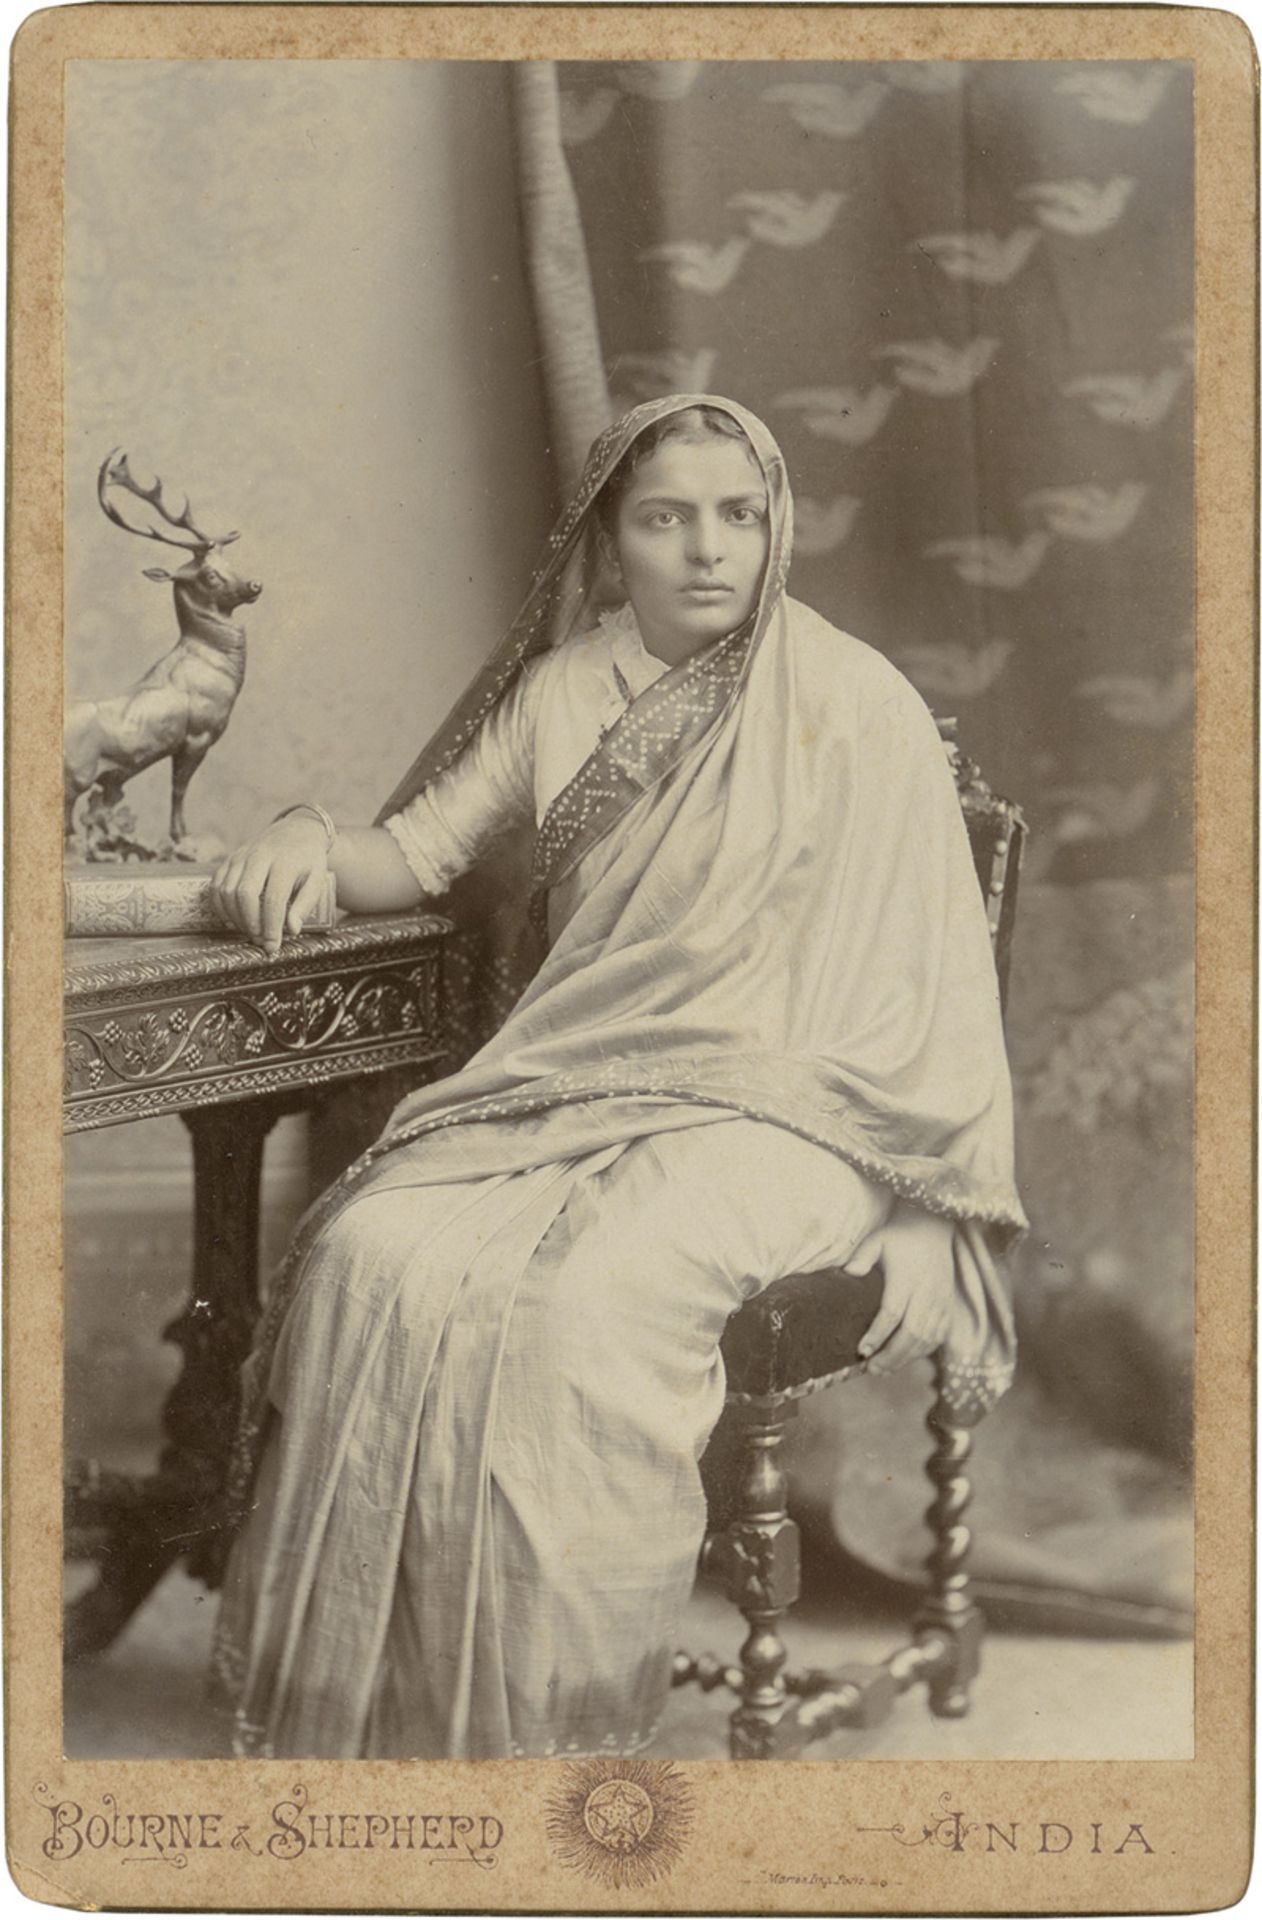 British India: Portraits of rulers and natives of India - Image 4 of 4